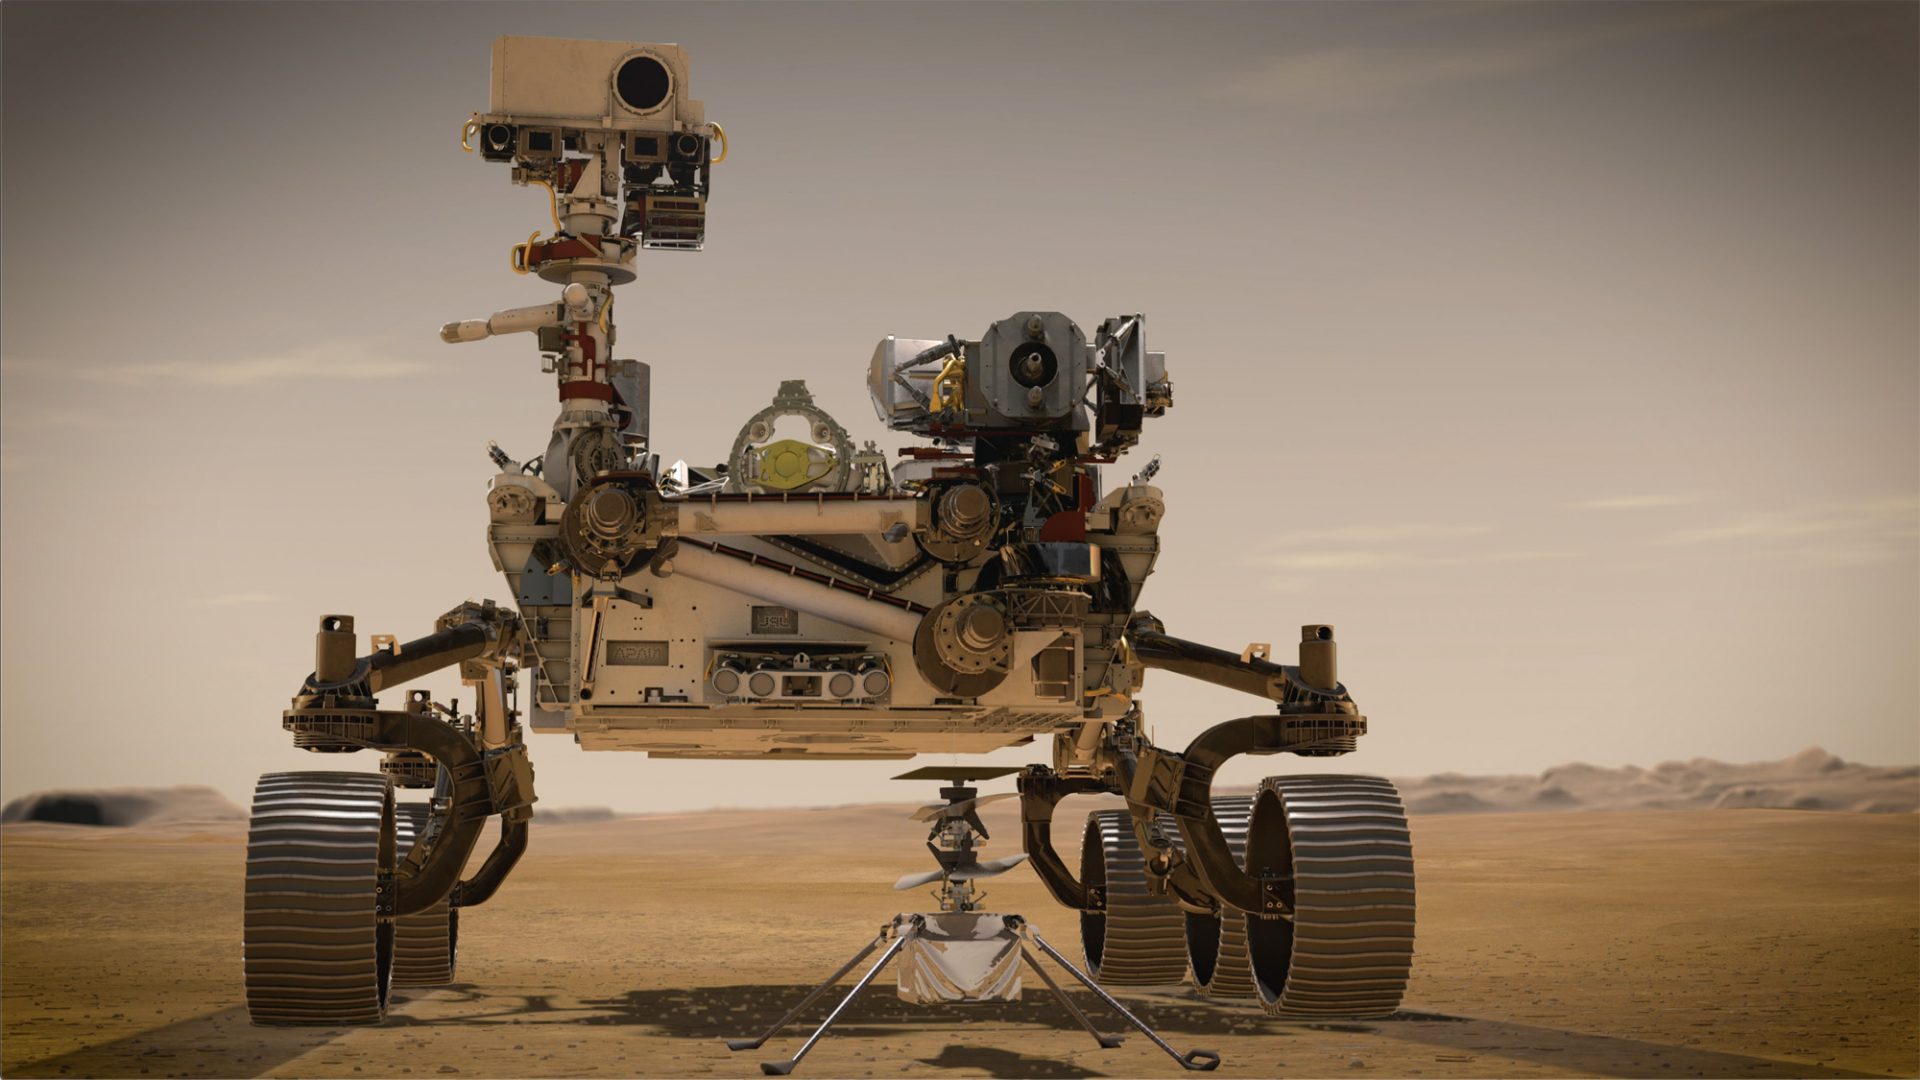 NASA’s Mars 2020 Perseverance rover mission: Live updates